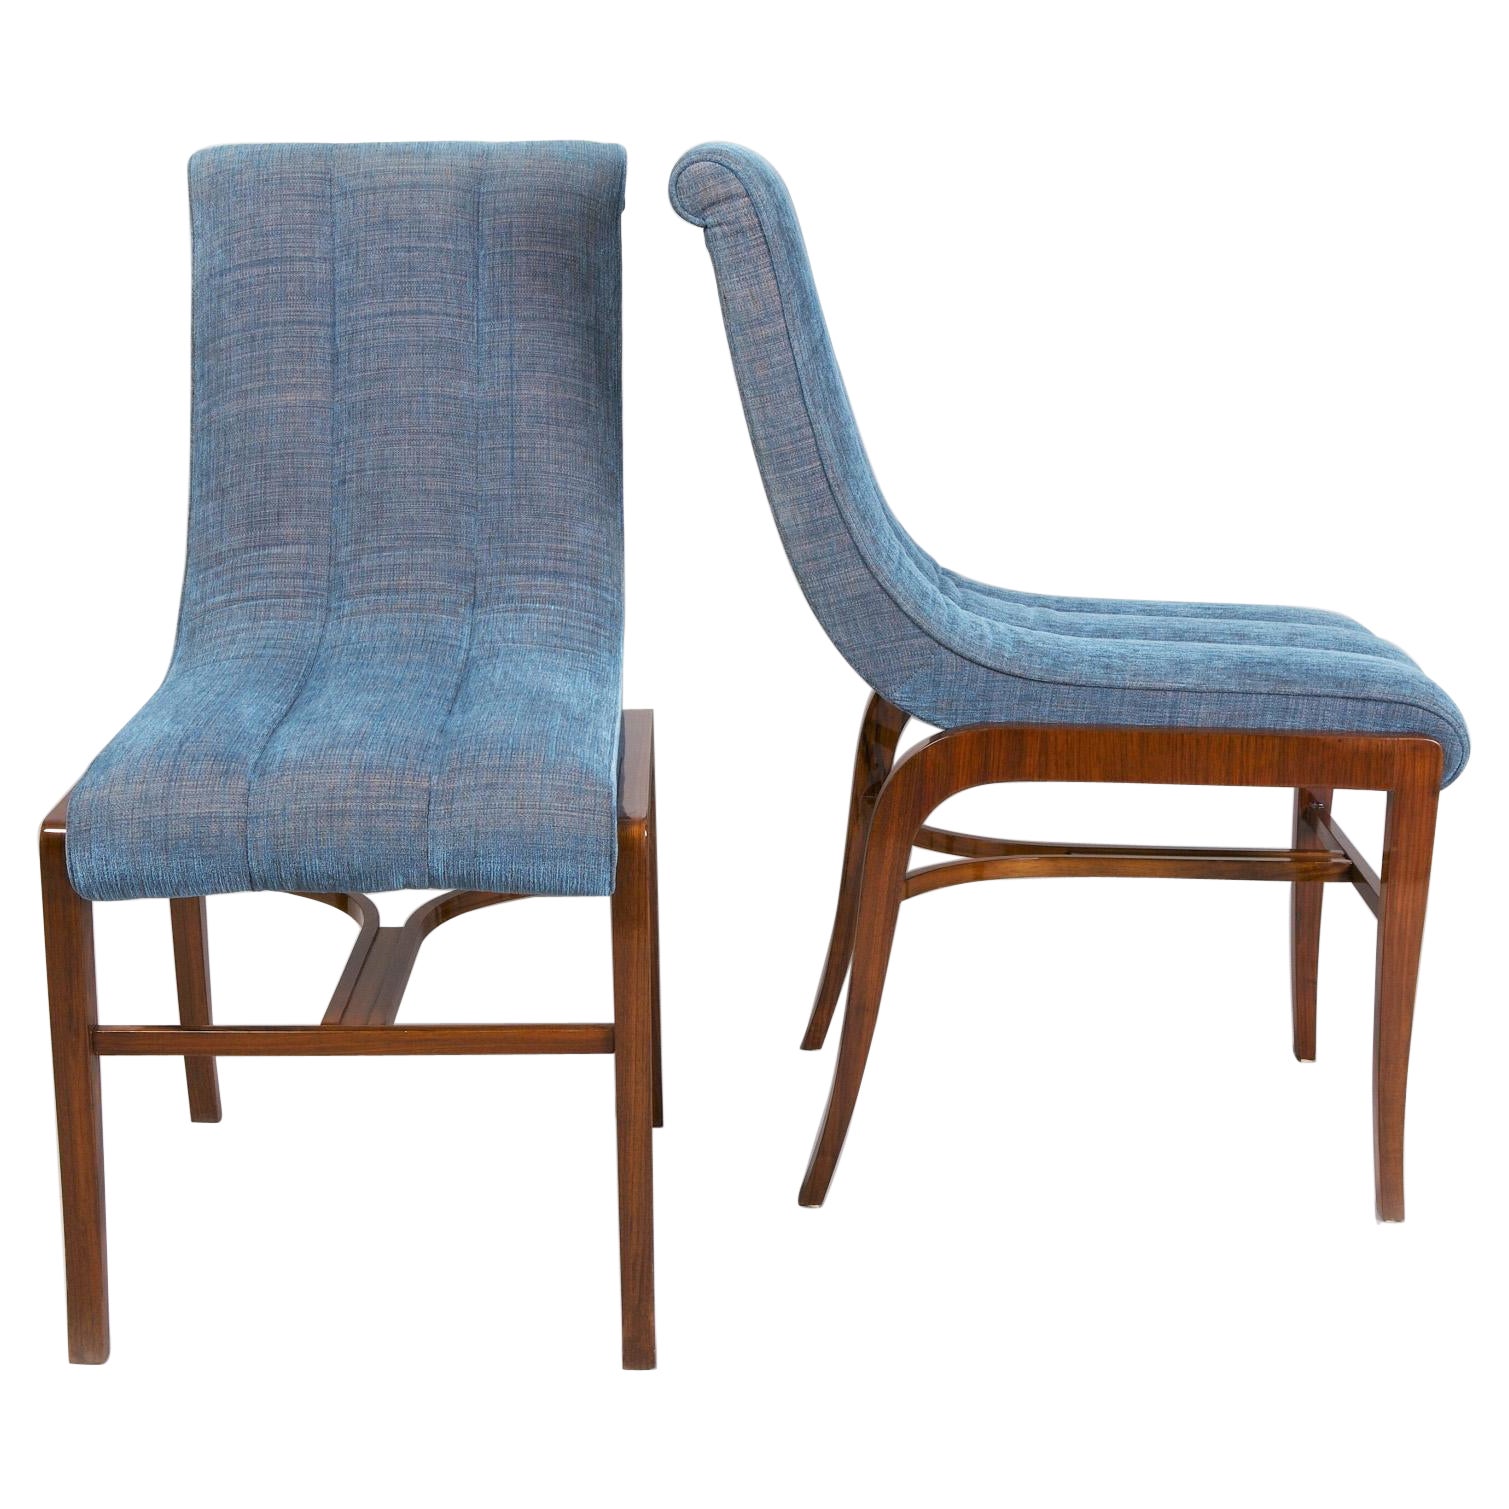 Restored French Art Deco Chairs Designed by Jules Leleu, 1920-1929, 2 Pieces